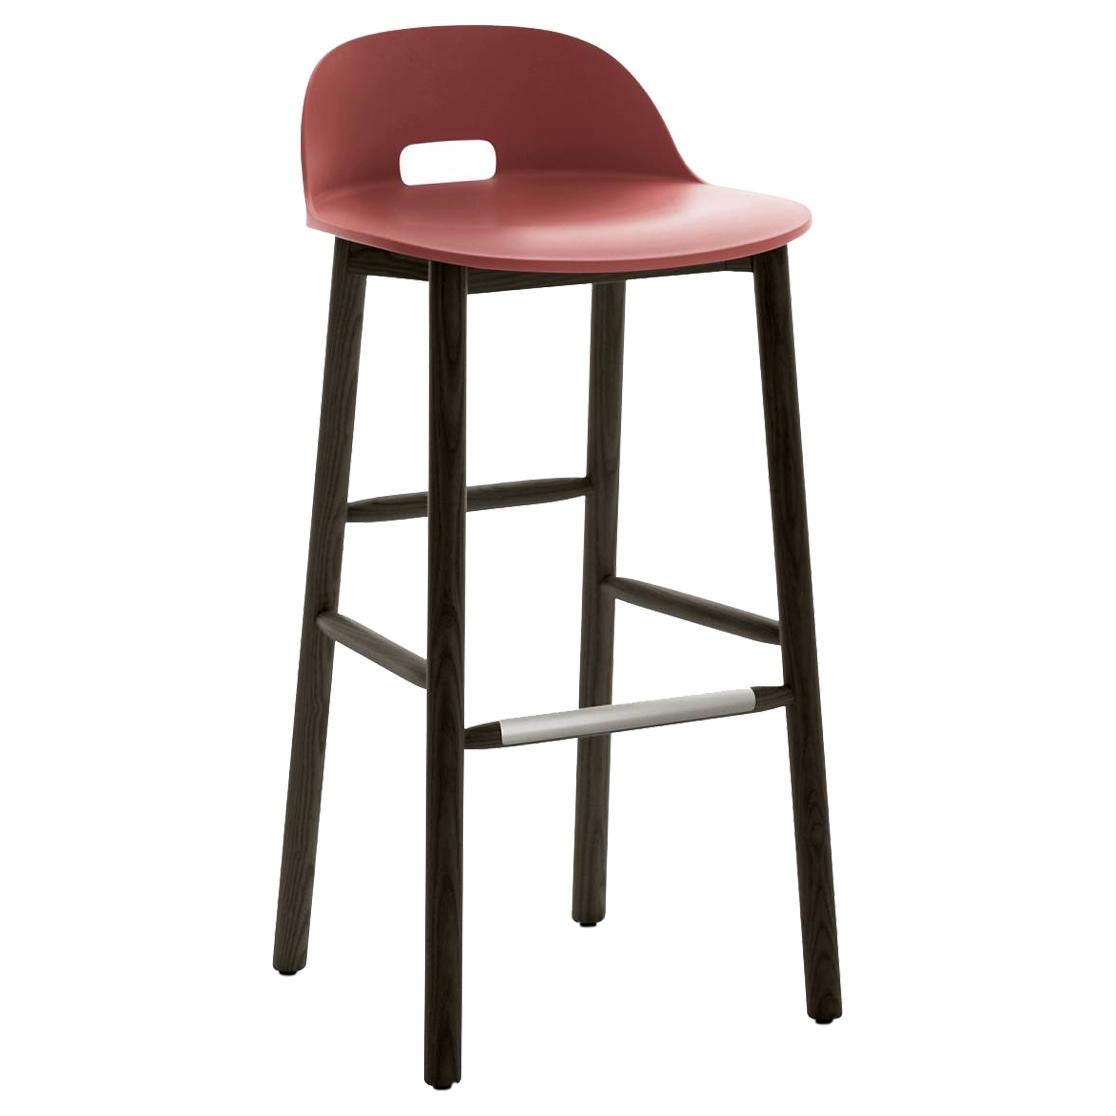 Emeco Alfi Barstool in Red and Dark Ash with Low Back by Jasper Morrison